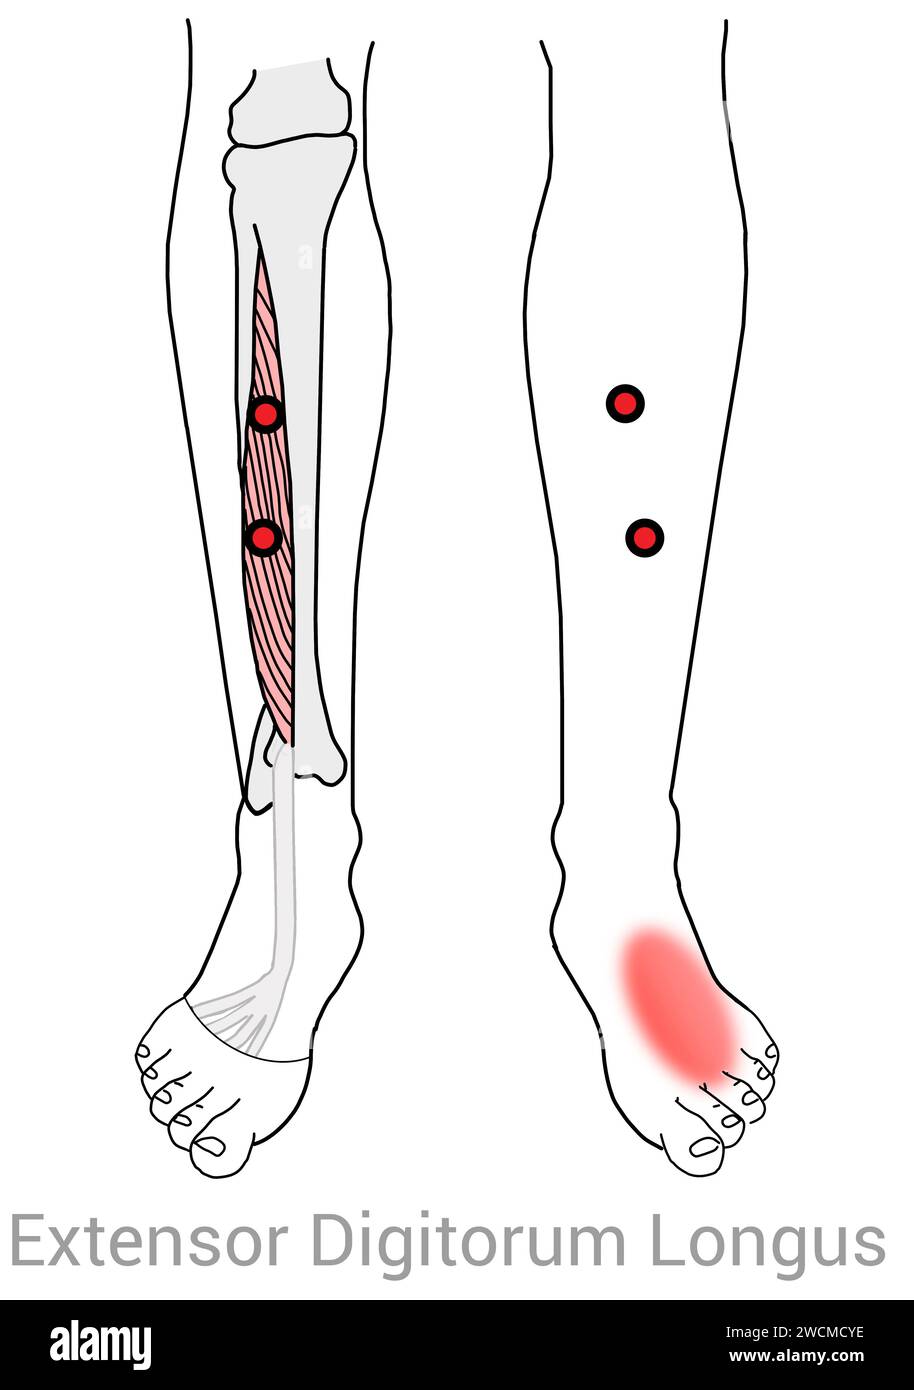 Extensor Digitorum Longus: Myofascial trigger points and associated pain locations Stock Photo